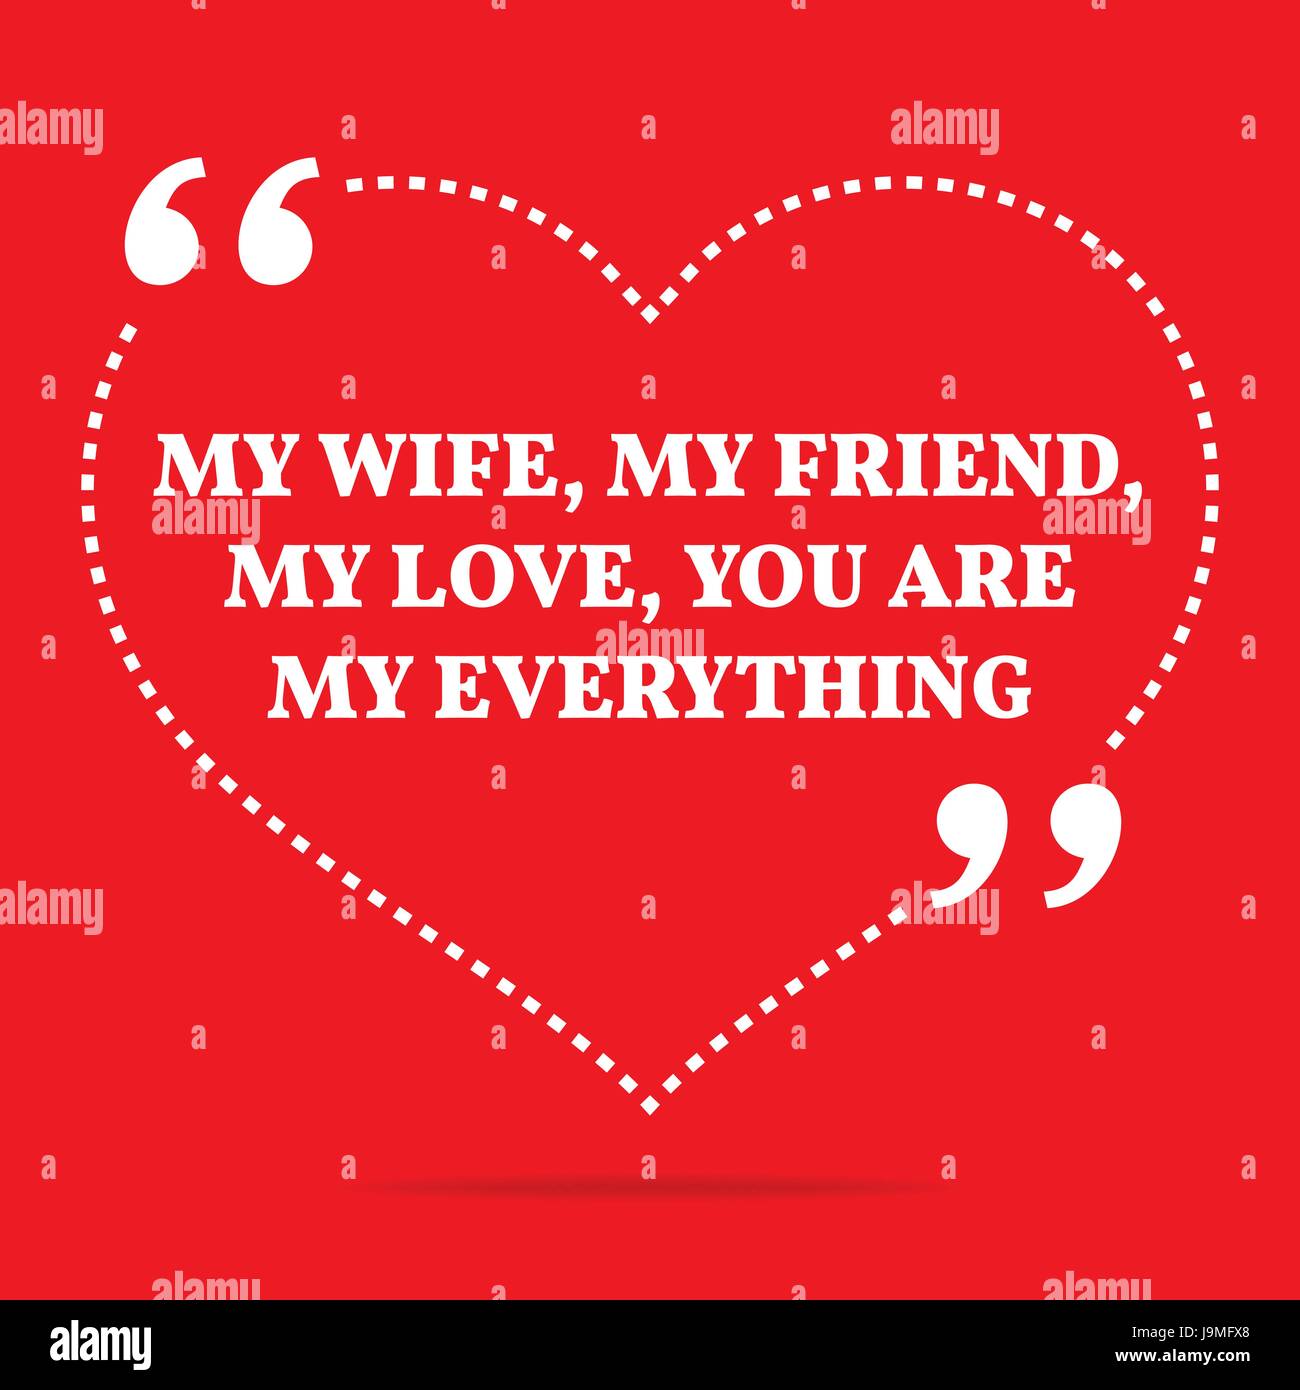 Inspirational love quote. My wife, my friend, my love, you are my ...